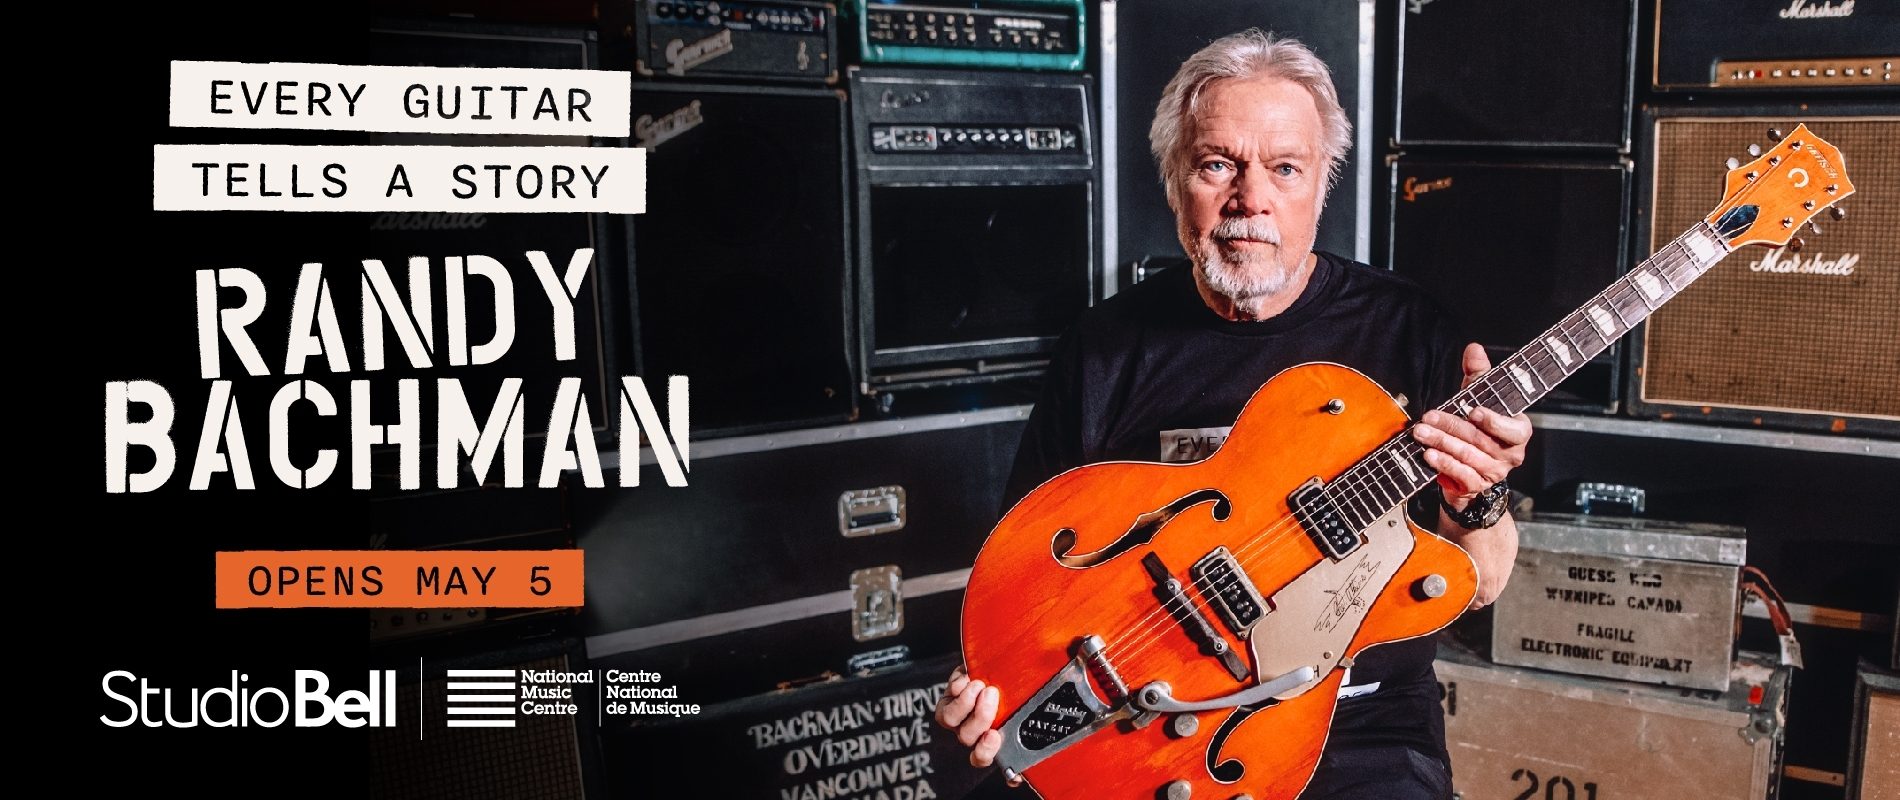 National Music Centre Unveils Randy Bachman: Every Guitar Tells a Story Exhibition on May 5